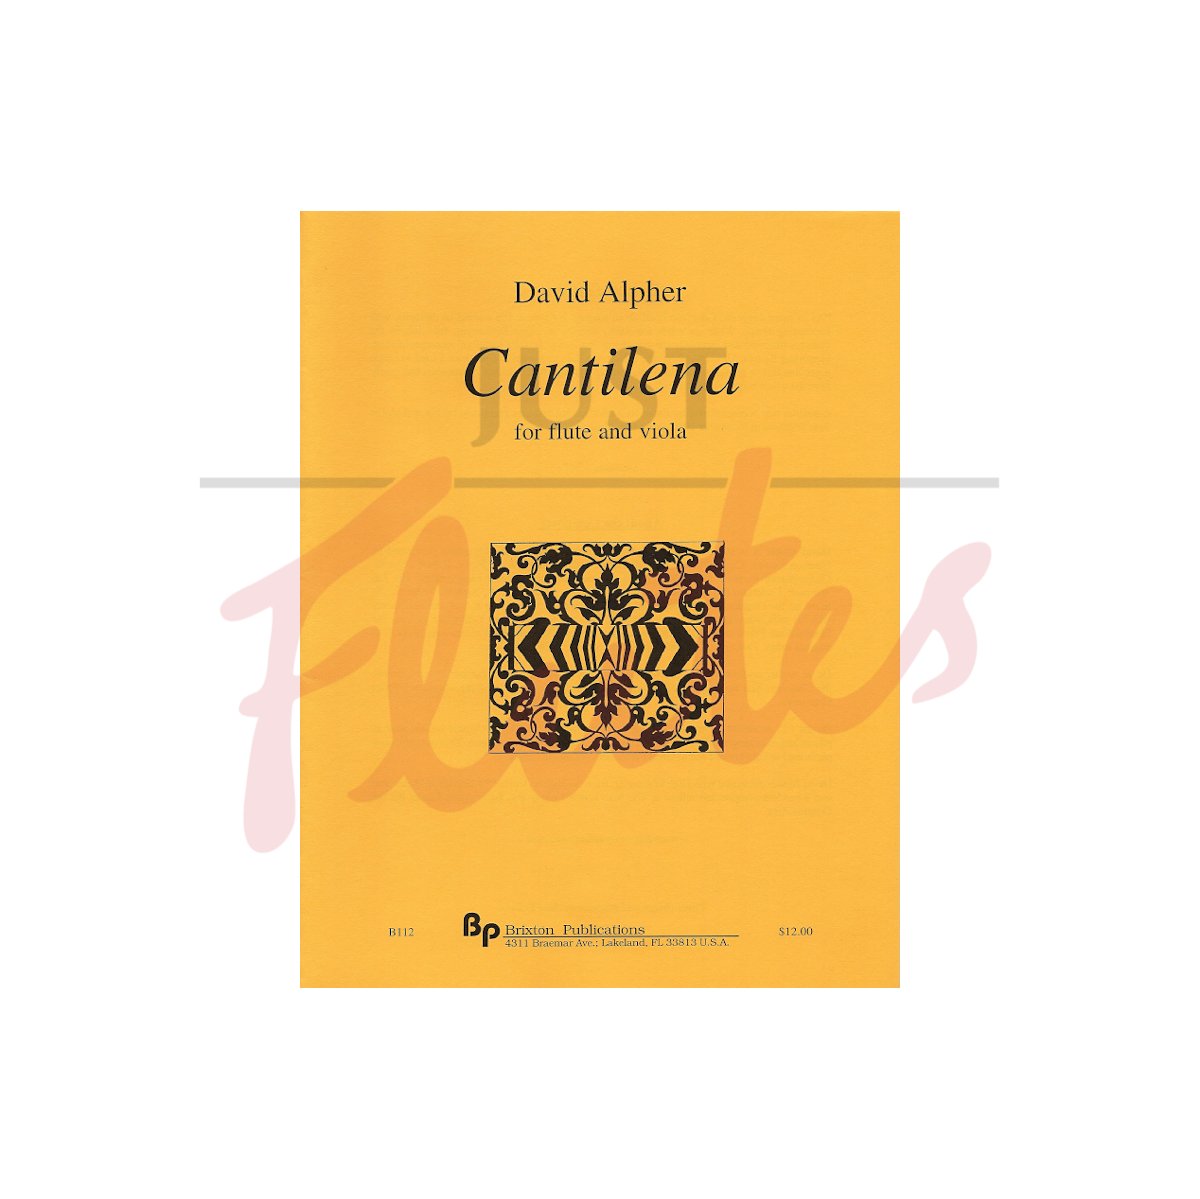 Cantilena for Flute and Viola